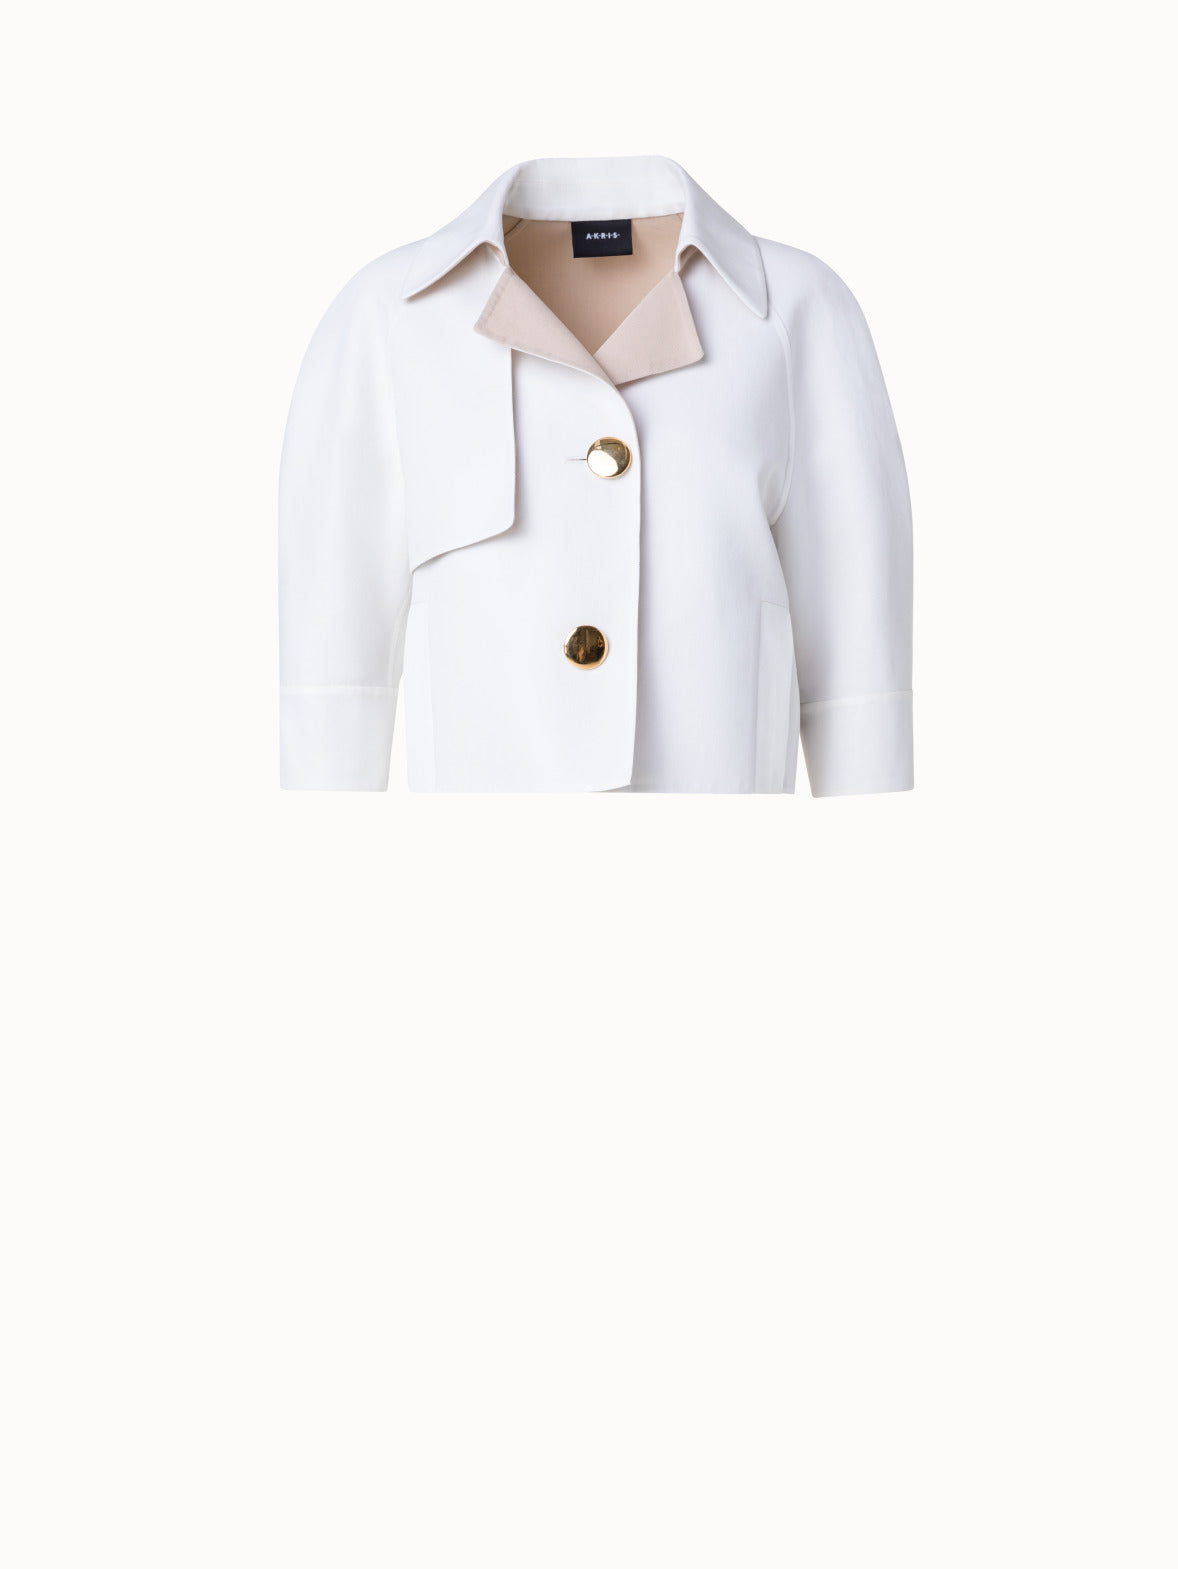 Double-Faced Canvas Cropped Jacket: Women's Designer Jackets